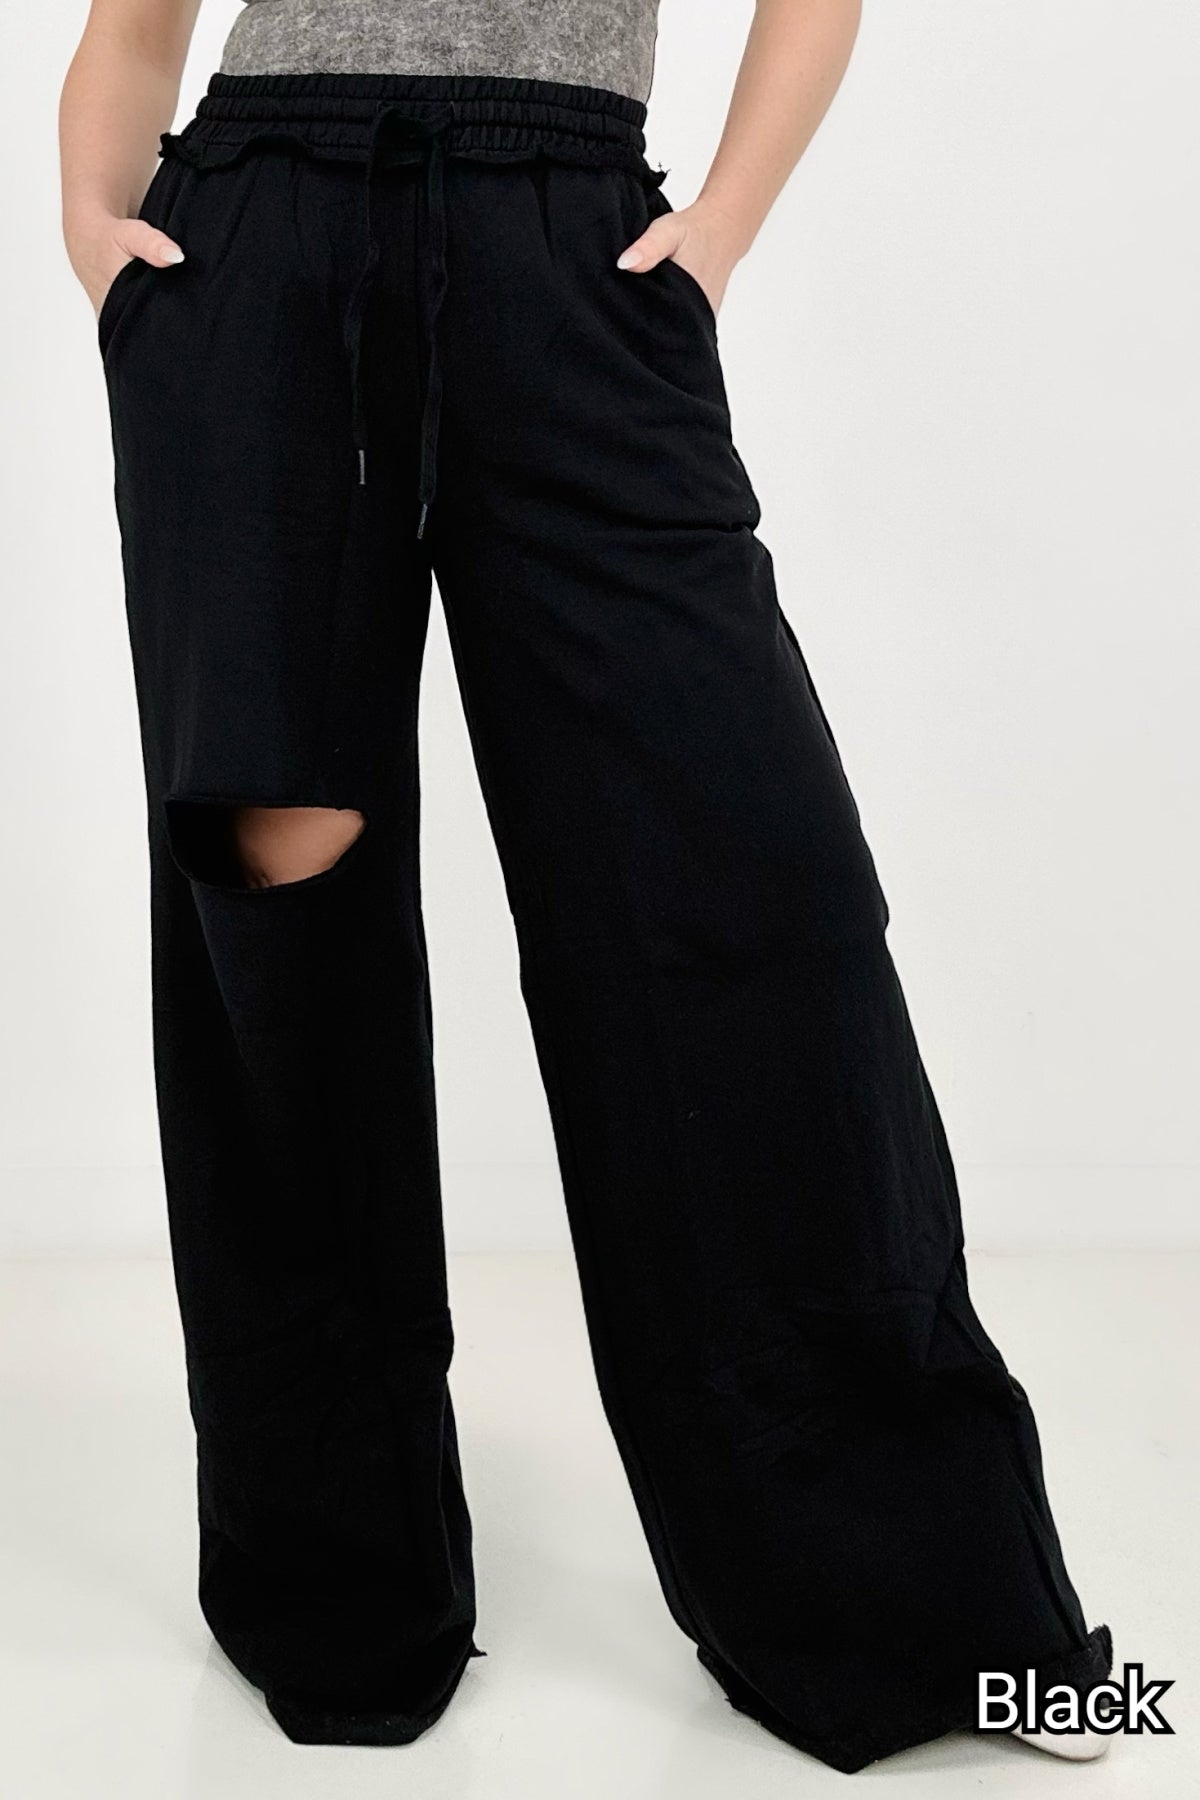 French Terry Laser Cut Pants With Pockets